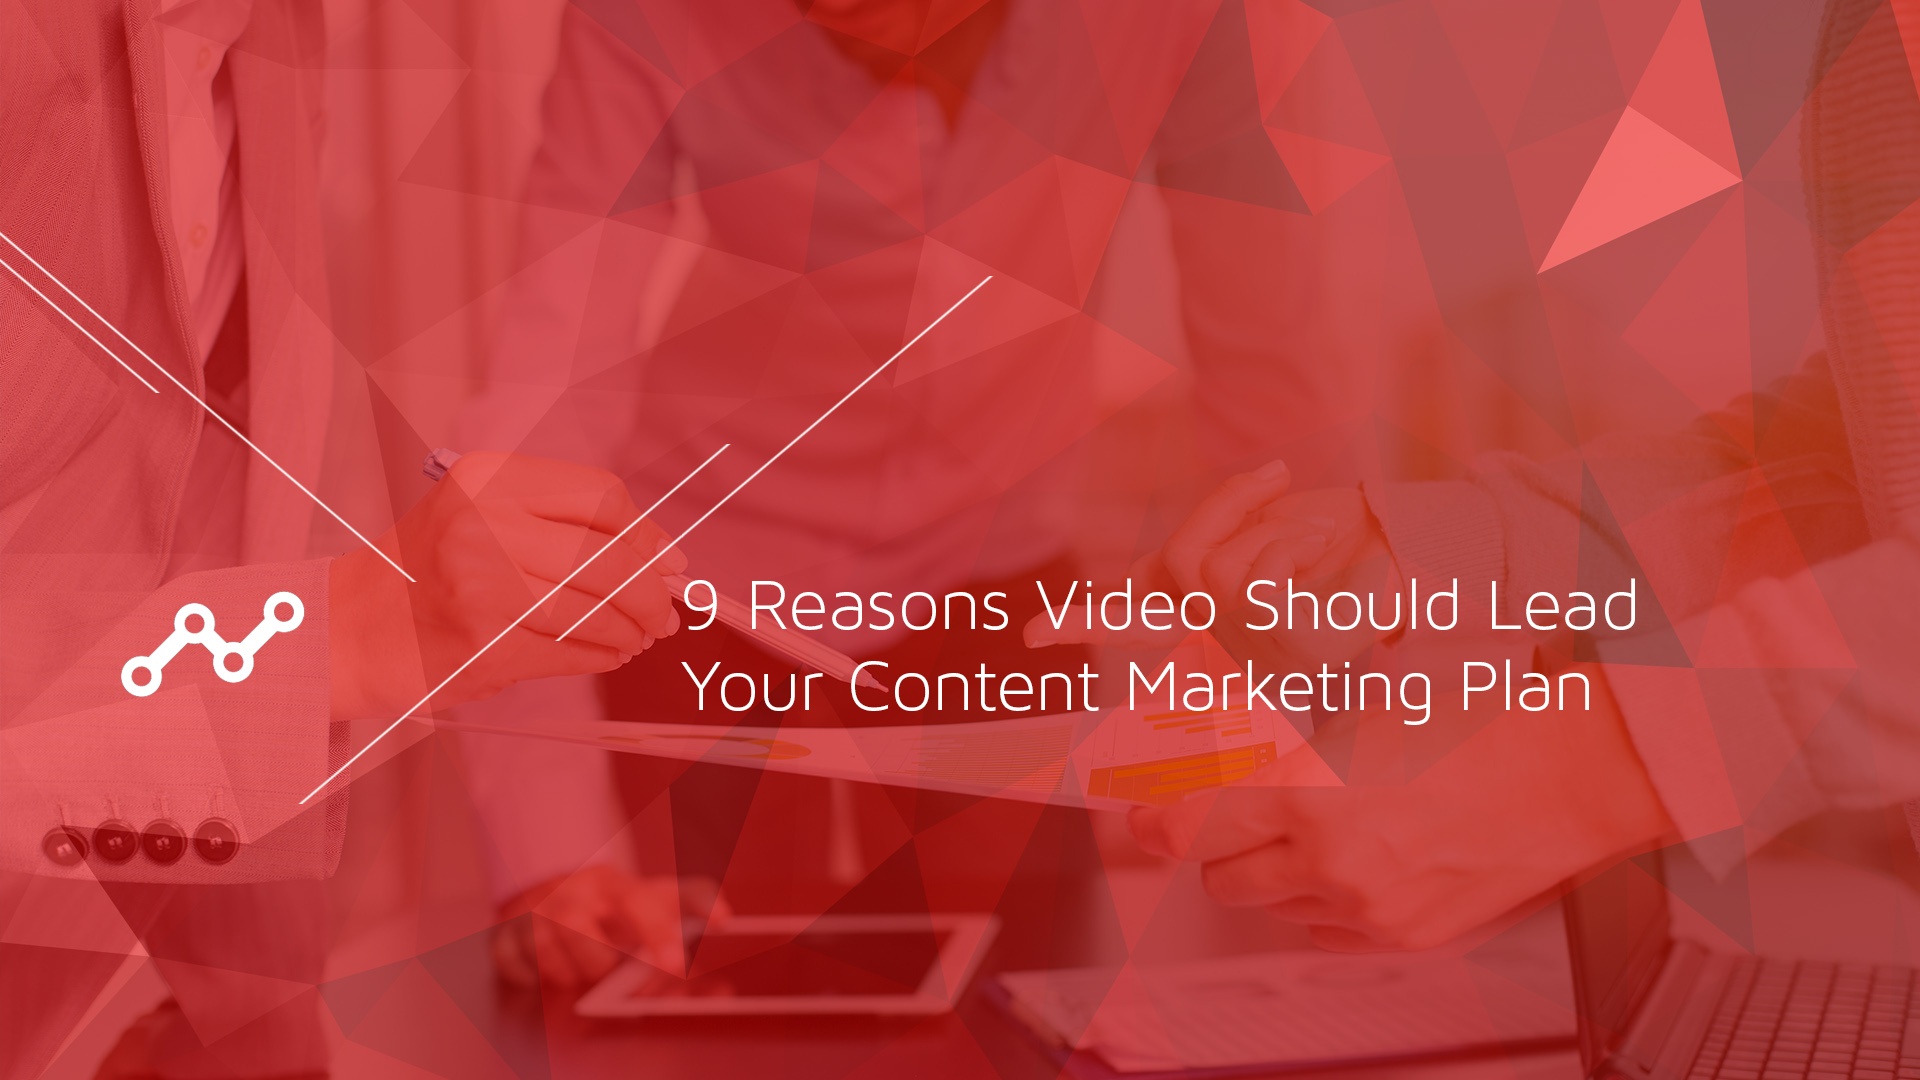 9 Reasons Video Should Lead Your Content Marketing Plan.jpg